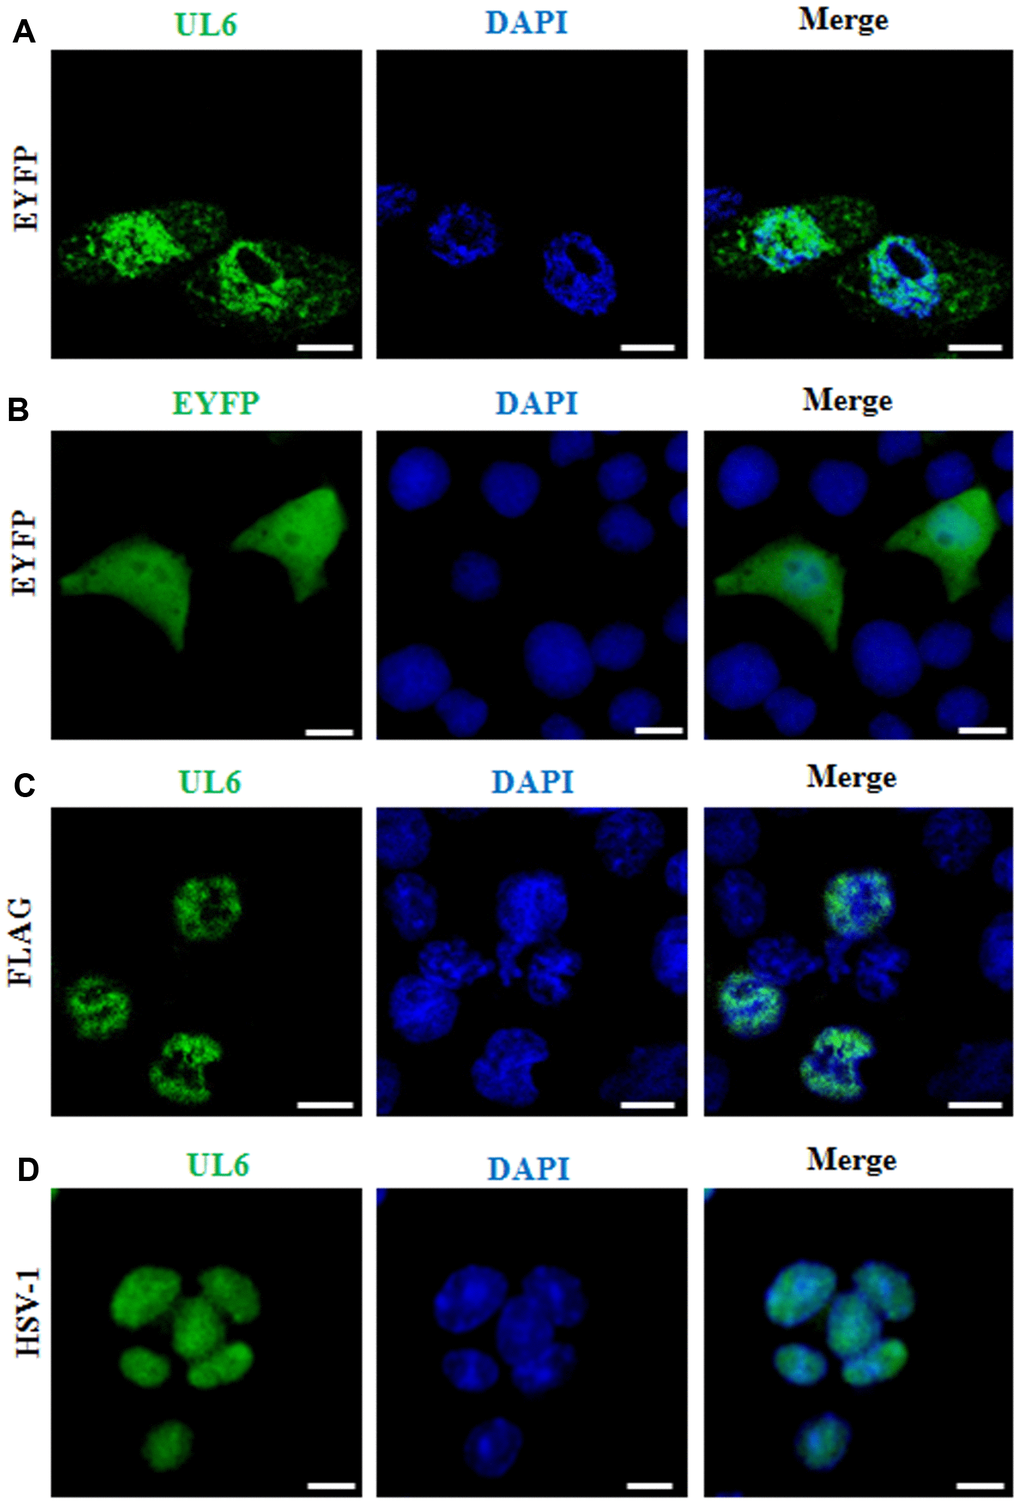 Subcellular distribution of UL6 in plasmid-transfected and HSV-1-infected cells. Subcellular distribution of EYFP-UL6 (A), EYFP (B) and FLAG-UL6 (C) in related plasmid transfected COS-7 cells. (D) Subcellular distribution of UL6 in HSV-1 infected Vero cells. Vero cells were infected with HSV-1 (F strain) at an MOI of 1. 8 h post-infection, Vero cells were fixed with 4% paraformaldehyde, permeabilized with 0.5% Triton X-100, and incubated with the anti-UL6 pAb. Then, cells were incubated with FITC-conjugated goat anti-rabbit IgG (green) and stained with DAPI (blue) to visualize the nuclei. EYFP fusion proteins were shown in pseudocolor green. The image shown represents a great proportion of the cells with homogeneous subcellular distribution. All scale bars indicate 10 um. Statistical analysis of the fluorescence was shown in Table 1.